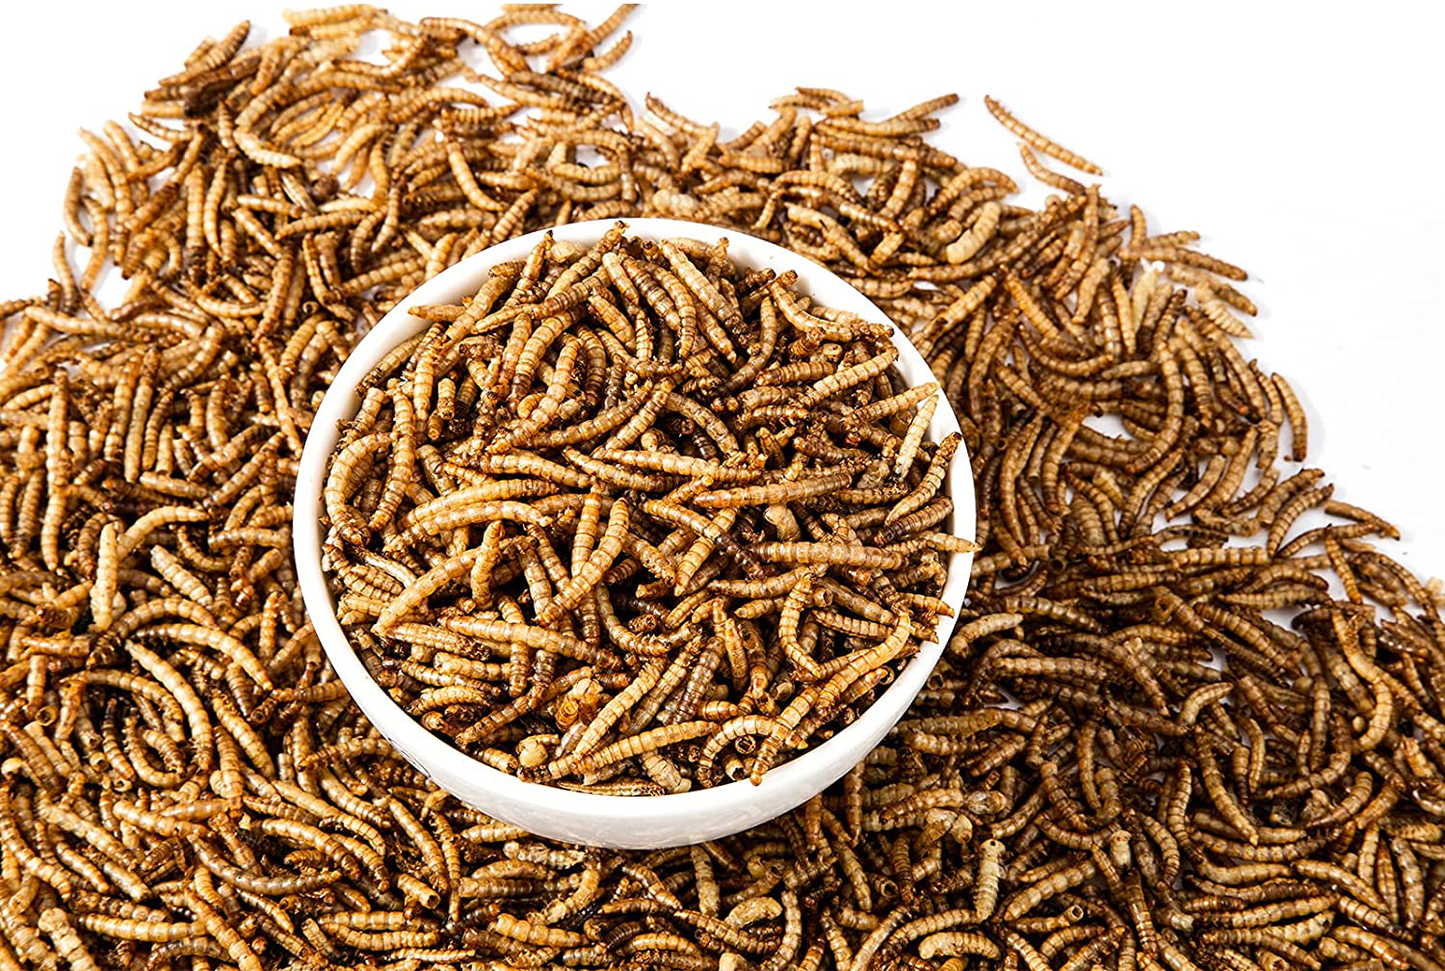 RANZ 5LB & 10LB Non-Gmo Dried Mealworms for Chicken Feed, High Protein Mealworm Treats, Best for Wild Birds, Ducks, Hens, Fish, Reptiles & Amphibian. Animals & Pet Supplies > Pet Supplies > Bird Supplies > Bird Treats RANZ   